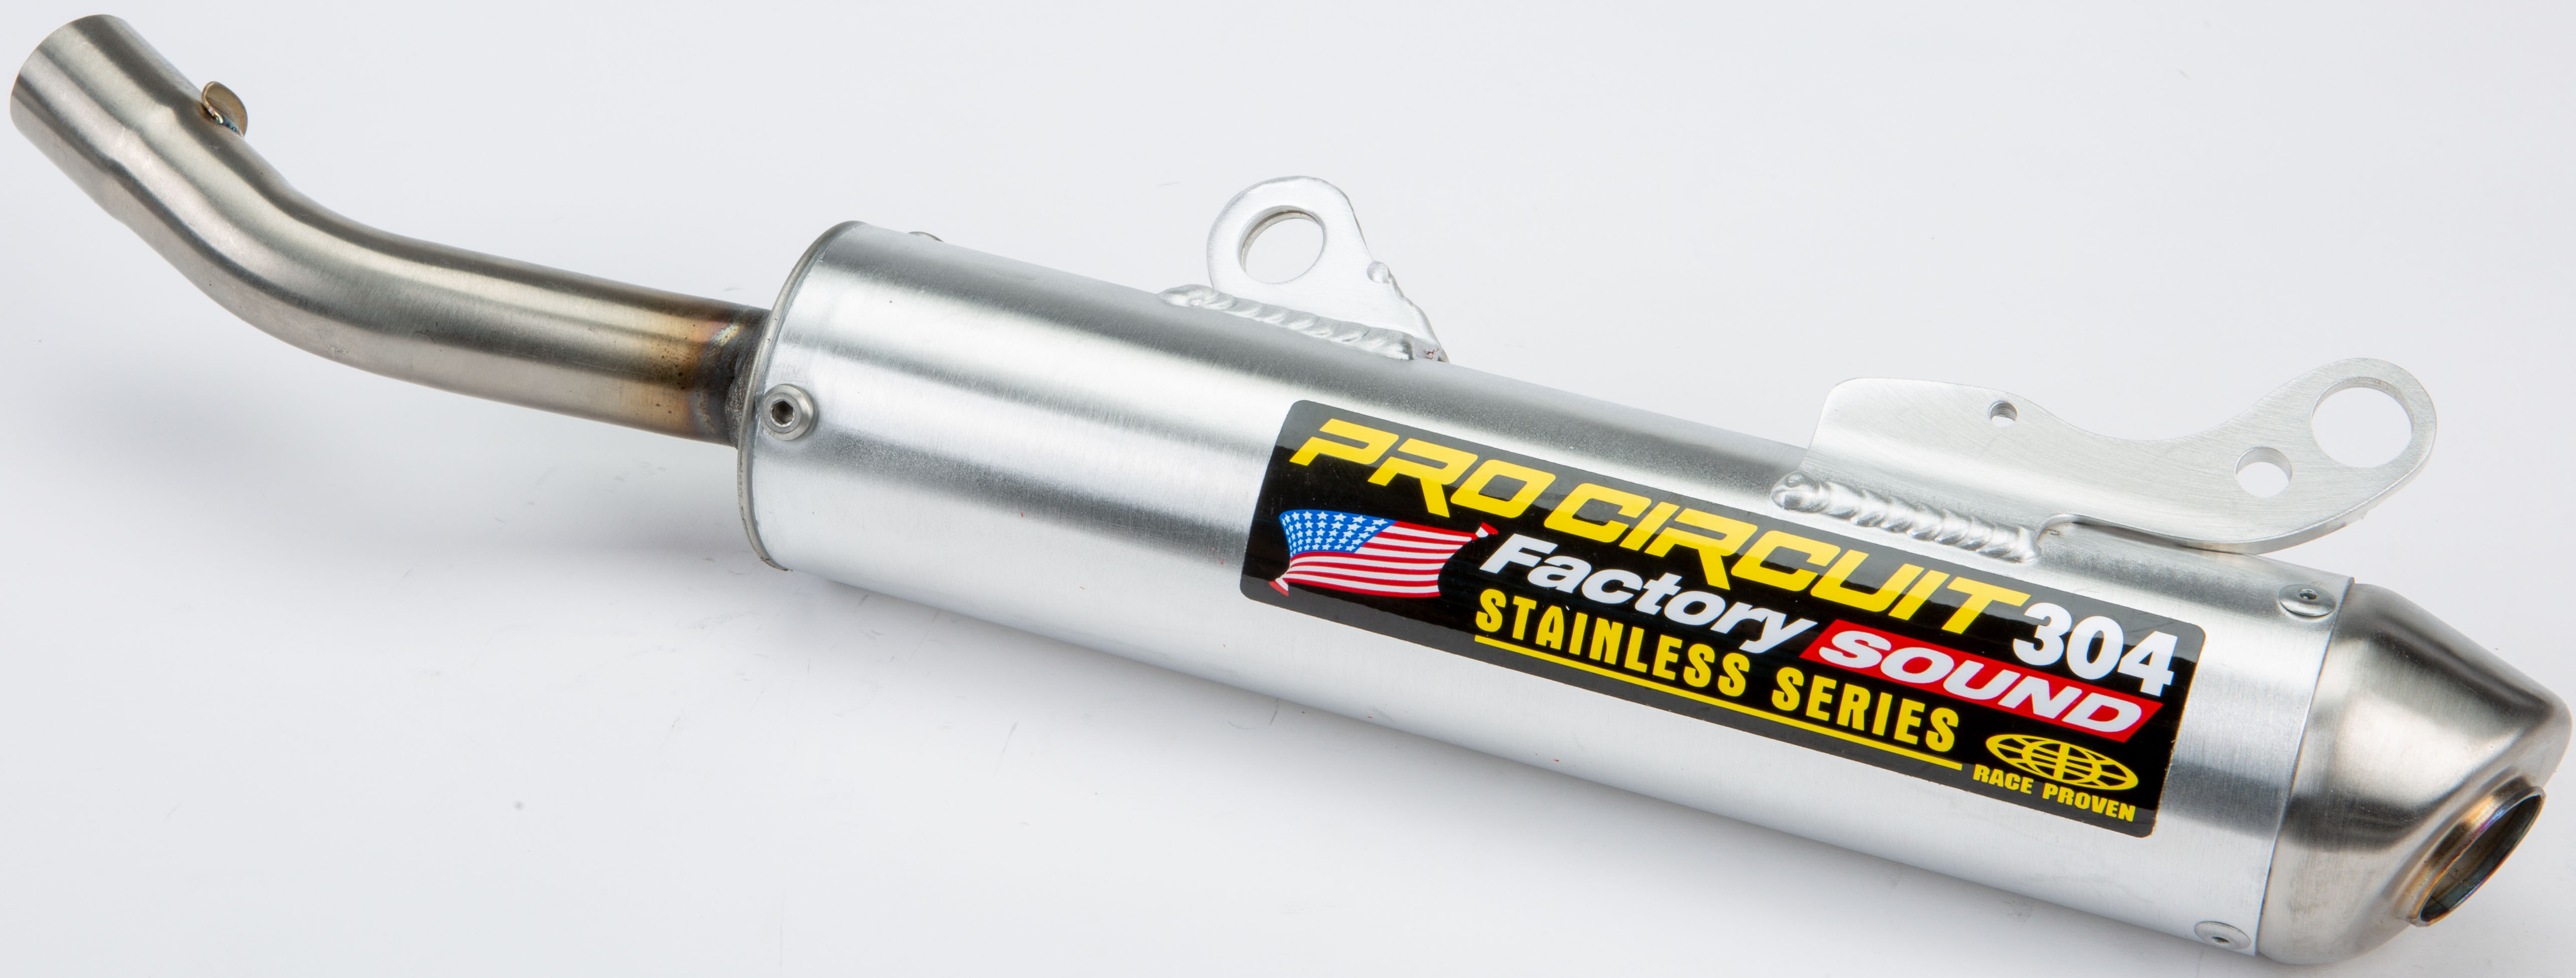 304 Aluminum Slip On Exhaust Silencer - For 02-03 Honda CR250R - Click Image to Close